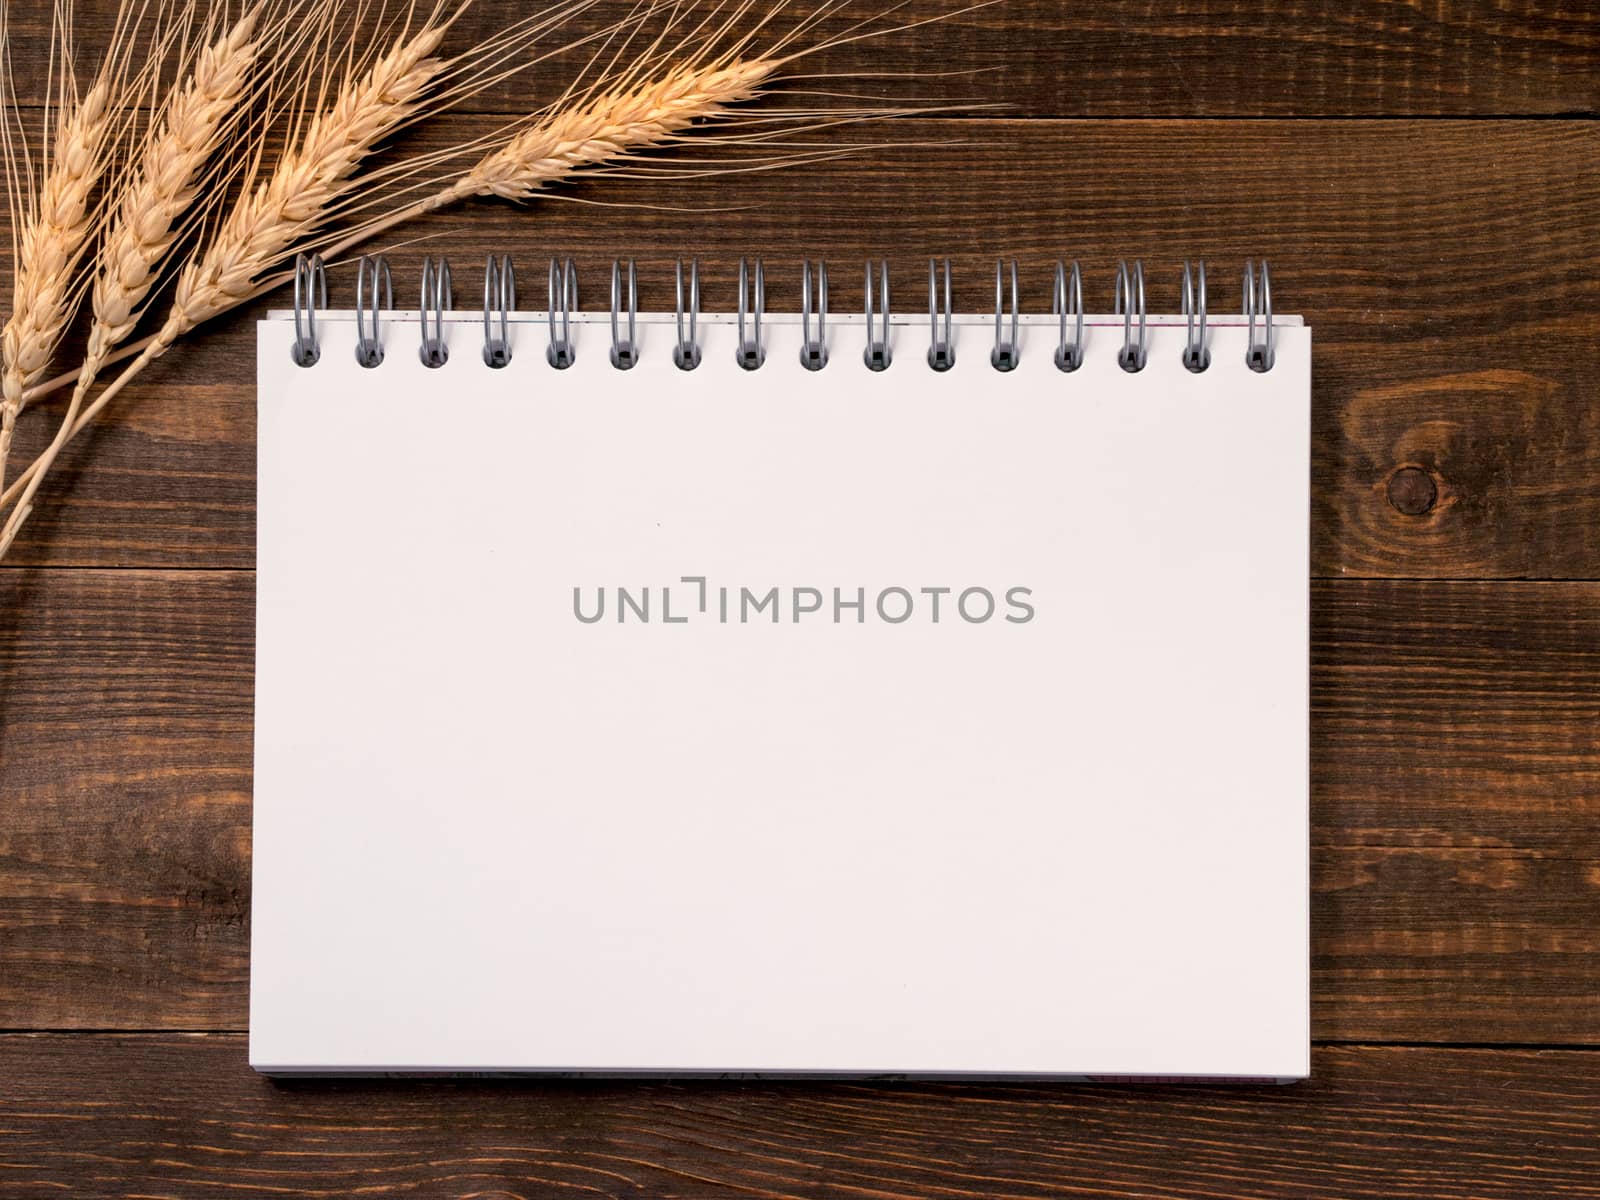 Top view of blank note paper with wheat stalks on dark brown wood table for background